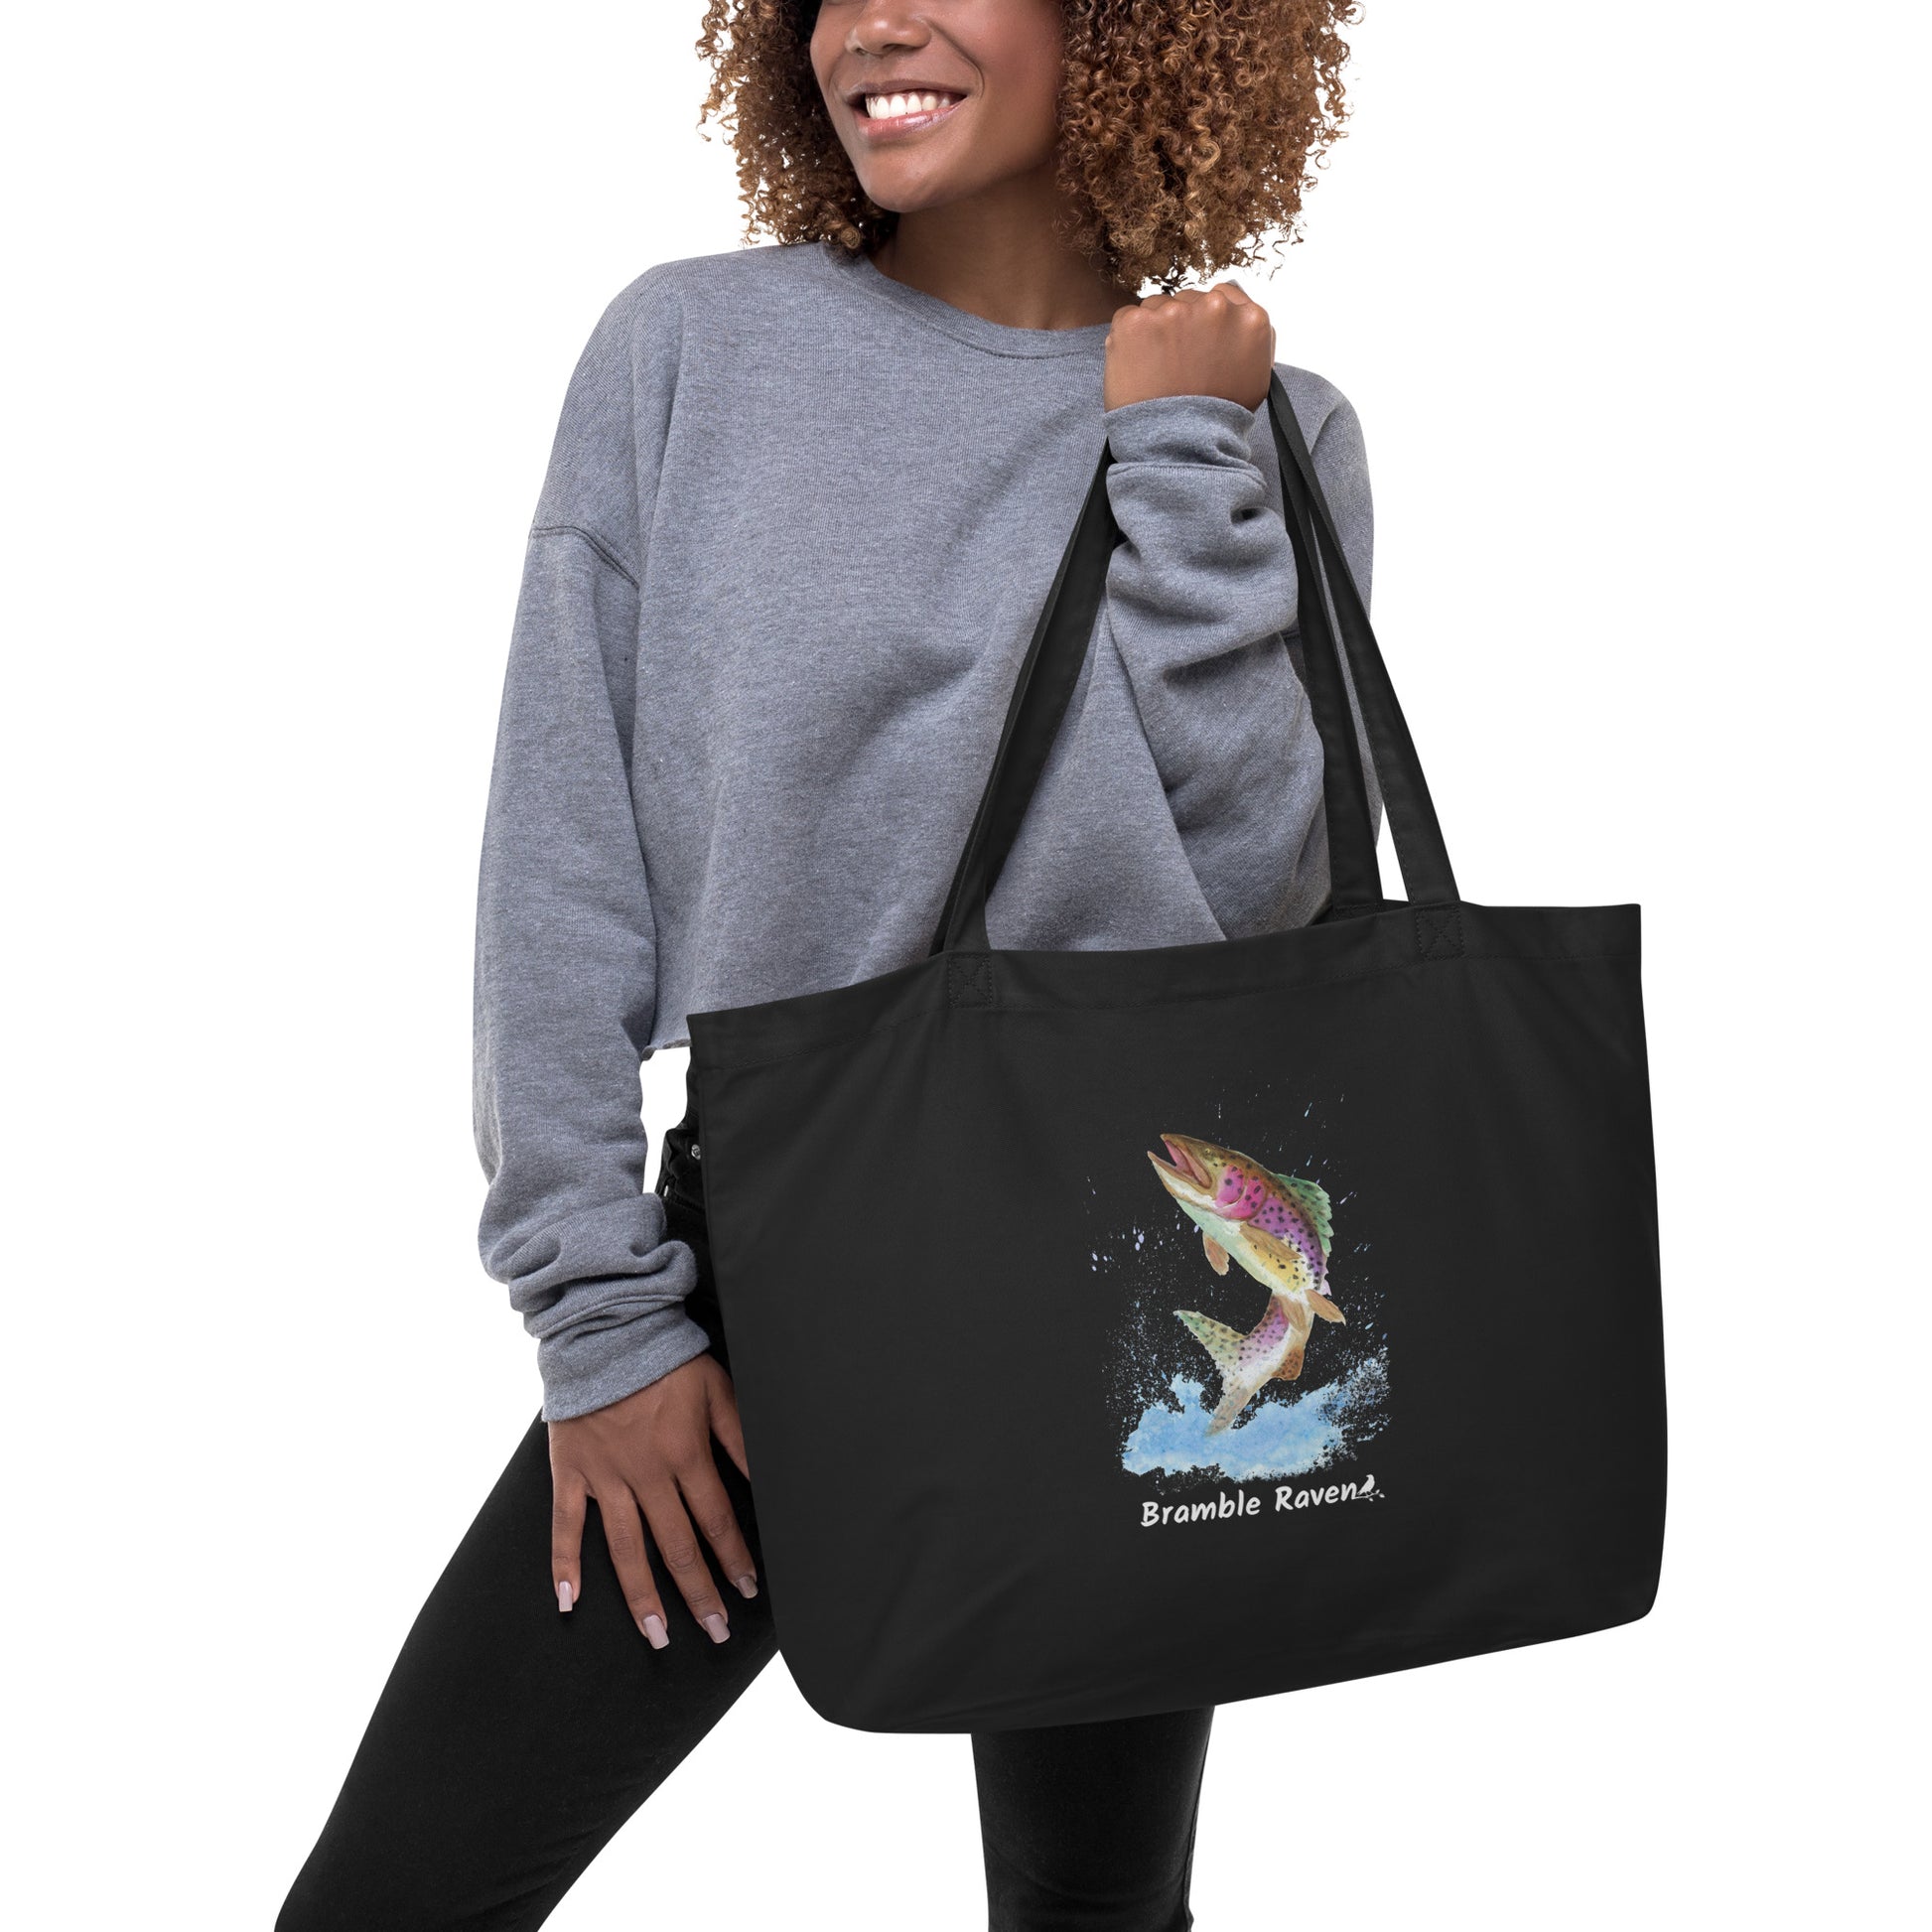 Original watercolor rainbow trout painting with water splashes. Printed on large black colored eco tote. 20 by 14 by 5 inches. 100% recycled cotton. Shown being held by female model.